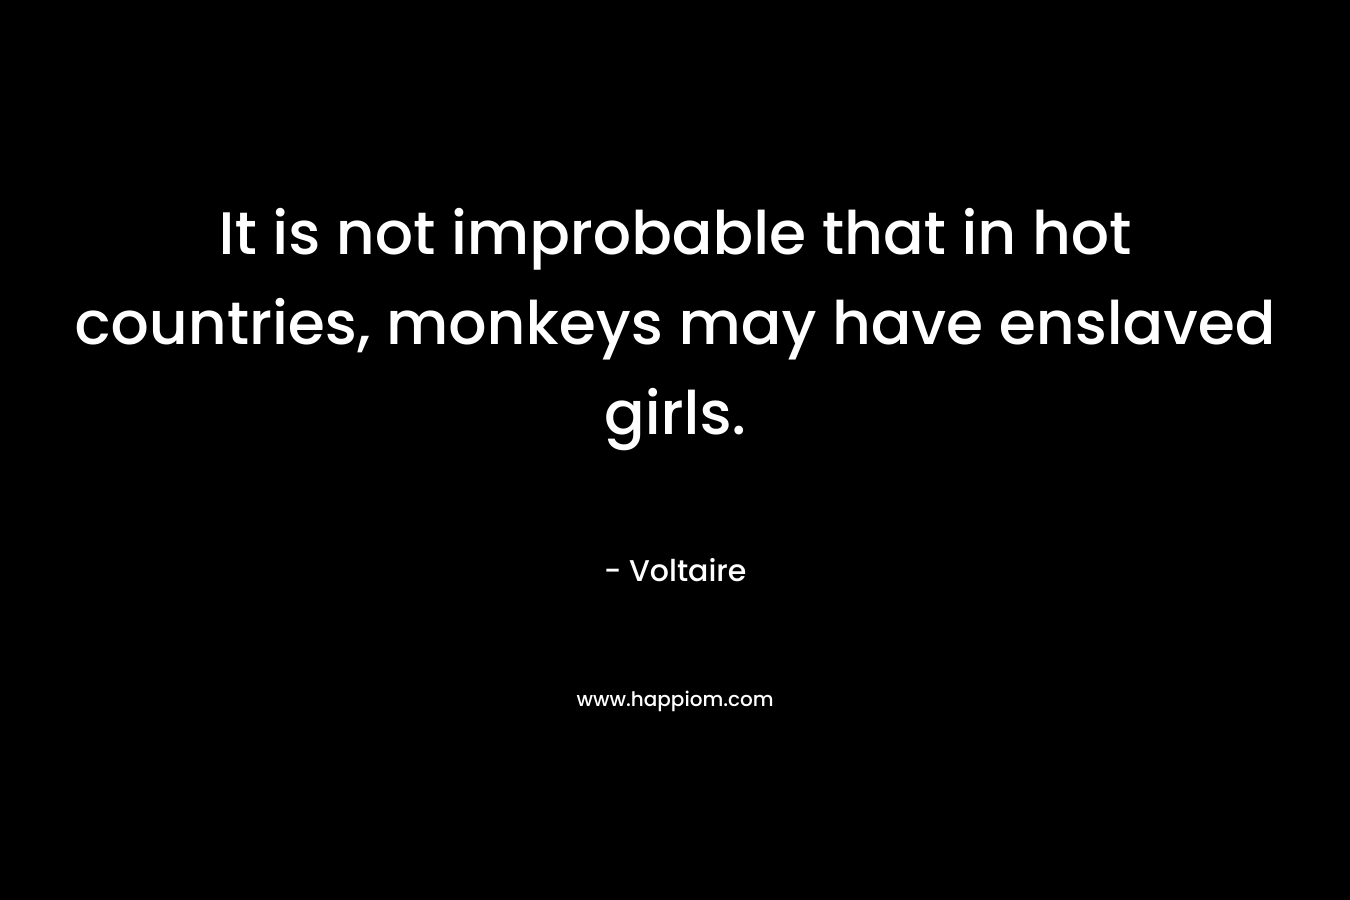 It is not improbable that in hot countries, monkeys may have enslaved girls.